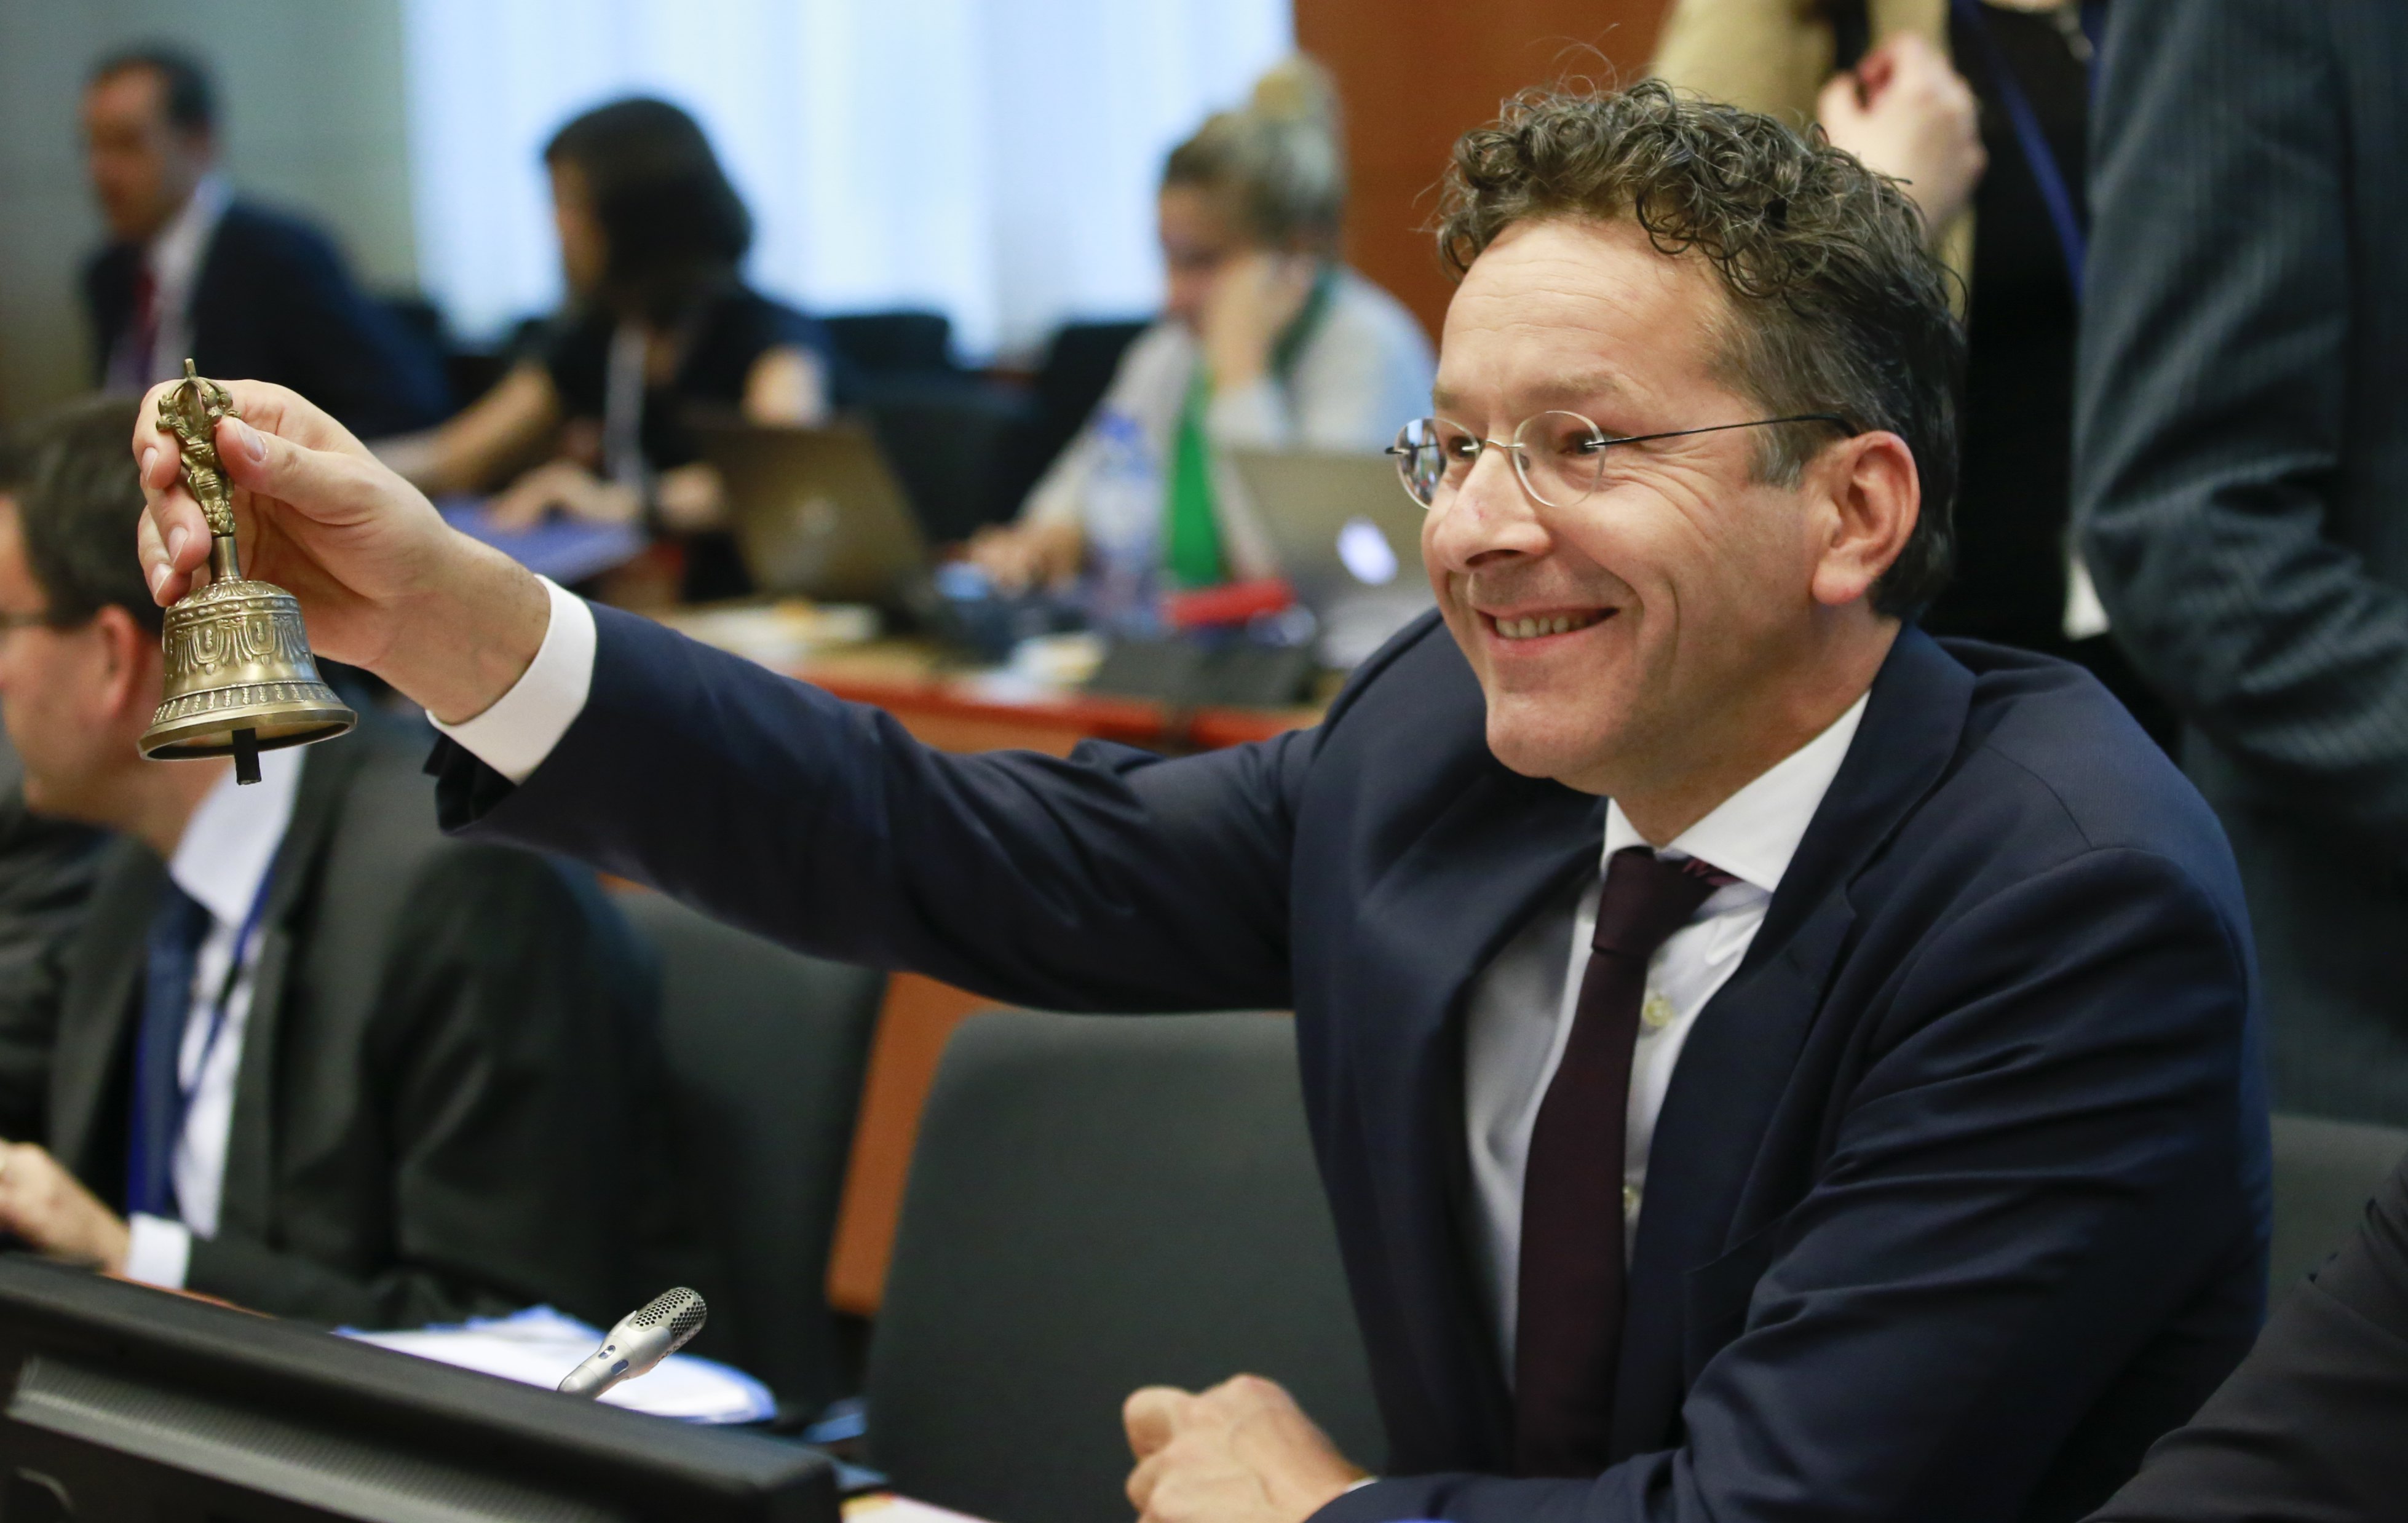 2017-07-10 10:21:13 epa06079351 Dutch Finance Minister and President of Eurogroup Jeroen Dijsselbloem rings the bell to start a Eurogroup Finance Ministers' meeting at the EU Council, in Brussels, Belgium, 10 July 2017. 'The Eurogroup will continue its thematic discussion on insolvency frameworks in the euro area, this time focusing on national supervisory practices and legal frameworks related to non-performing loans', the EU Councill said in their agenda highlights. EPA/OLIVIER HOSLET